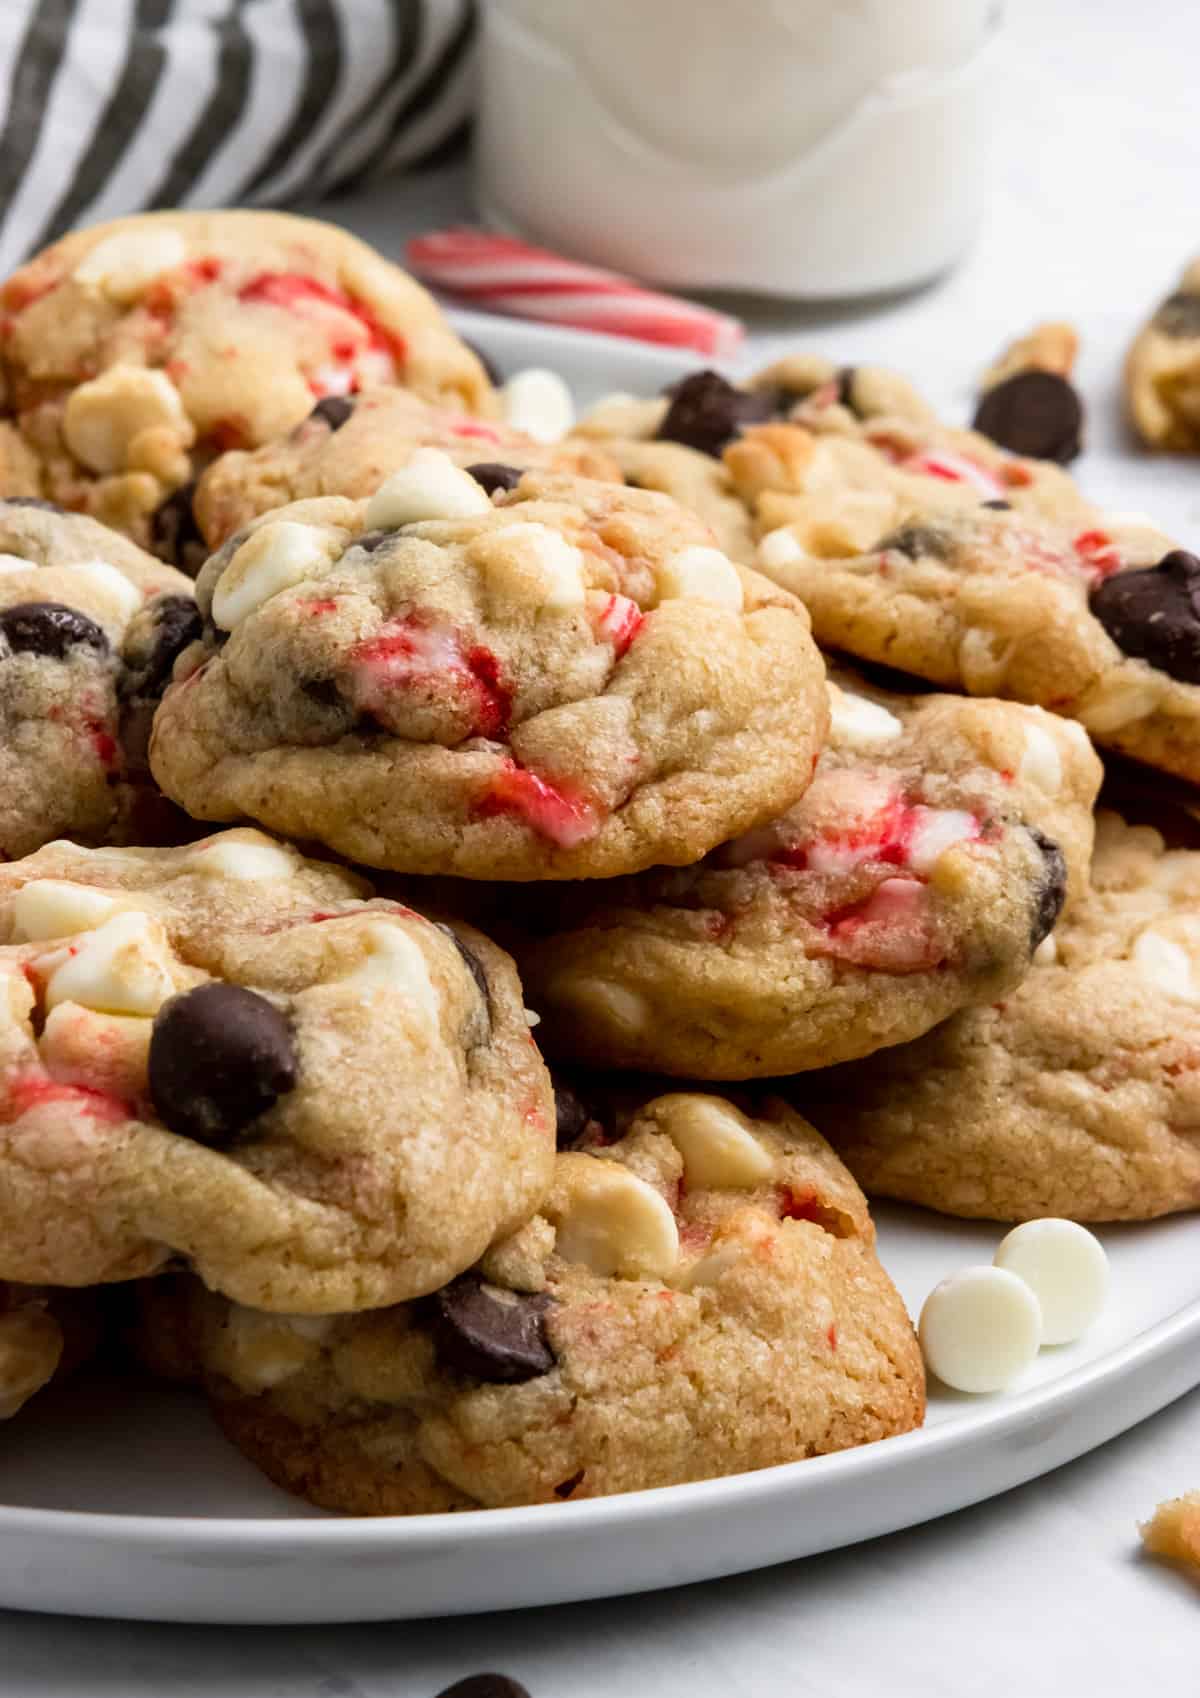 Plate of cookies with milk and white chocolate chips.